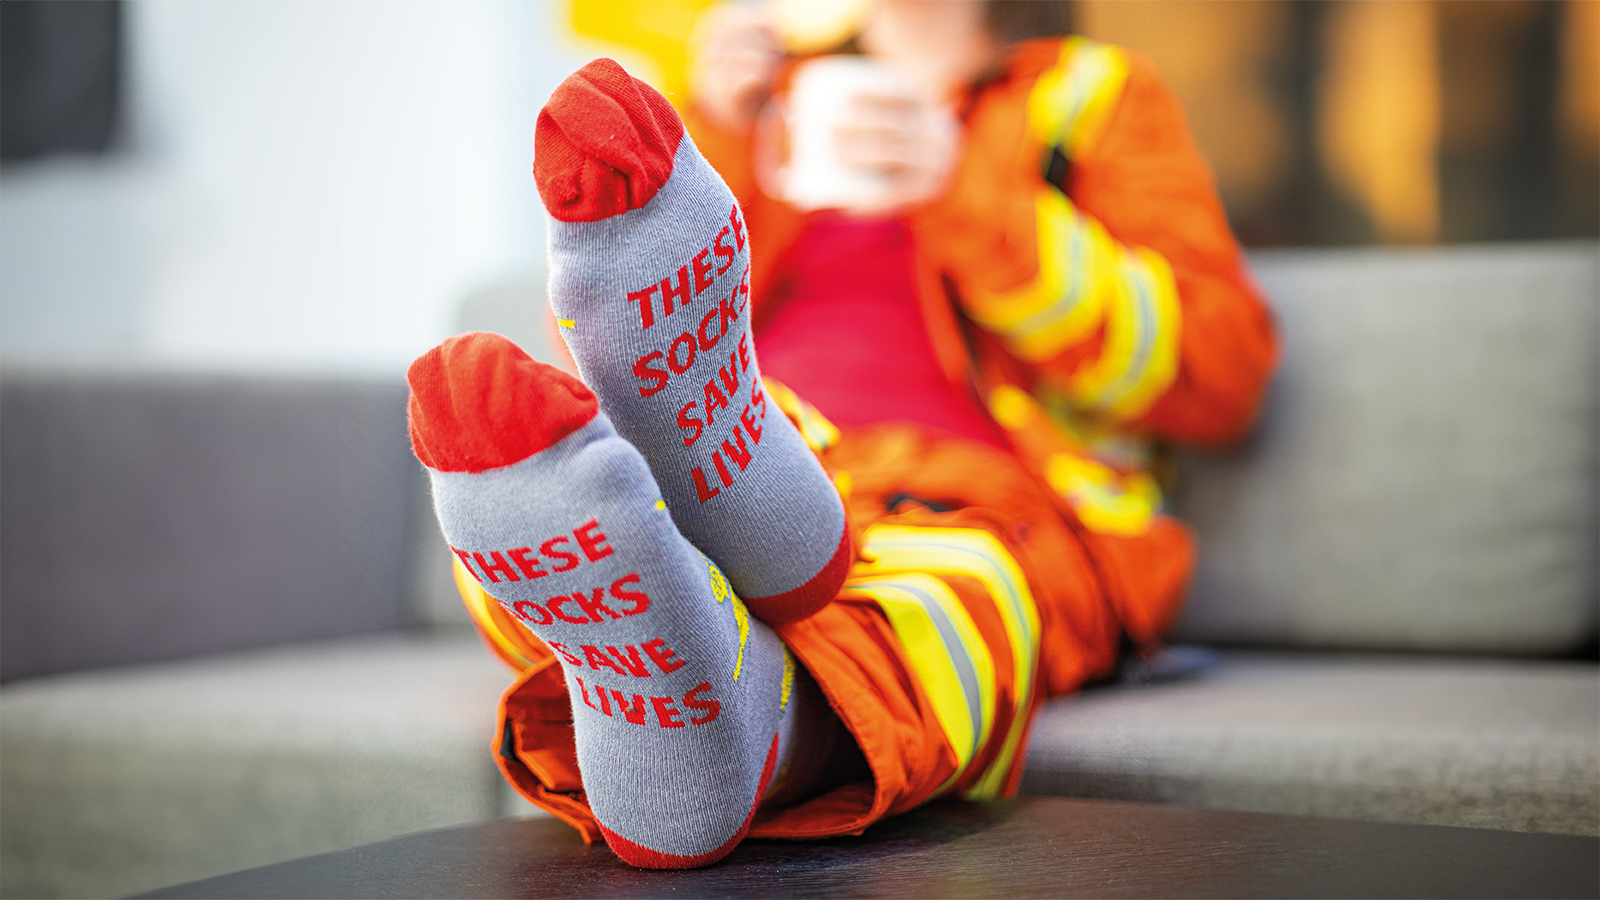 These Socks Save Lives - Grey